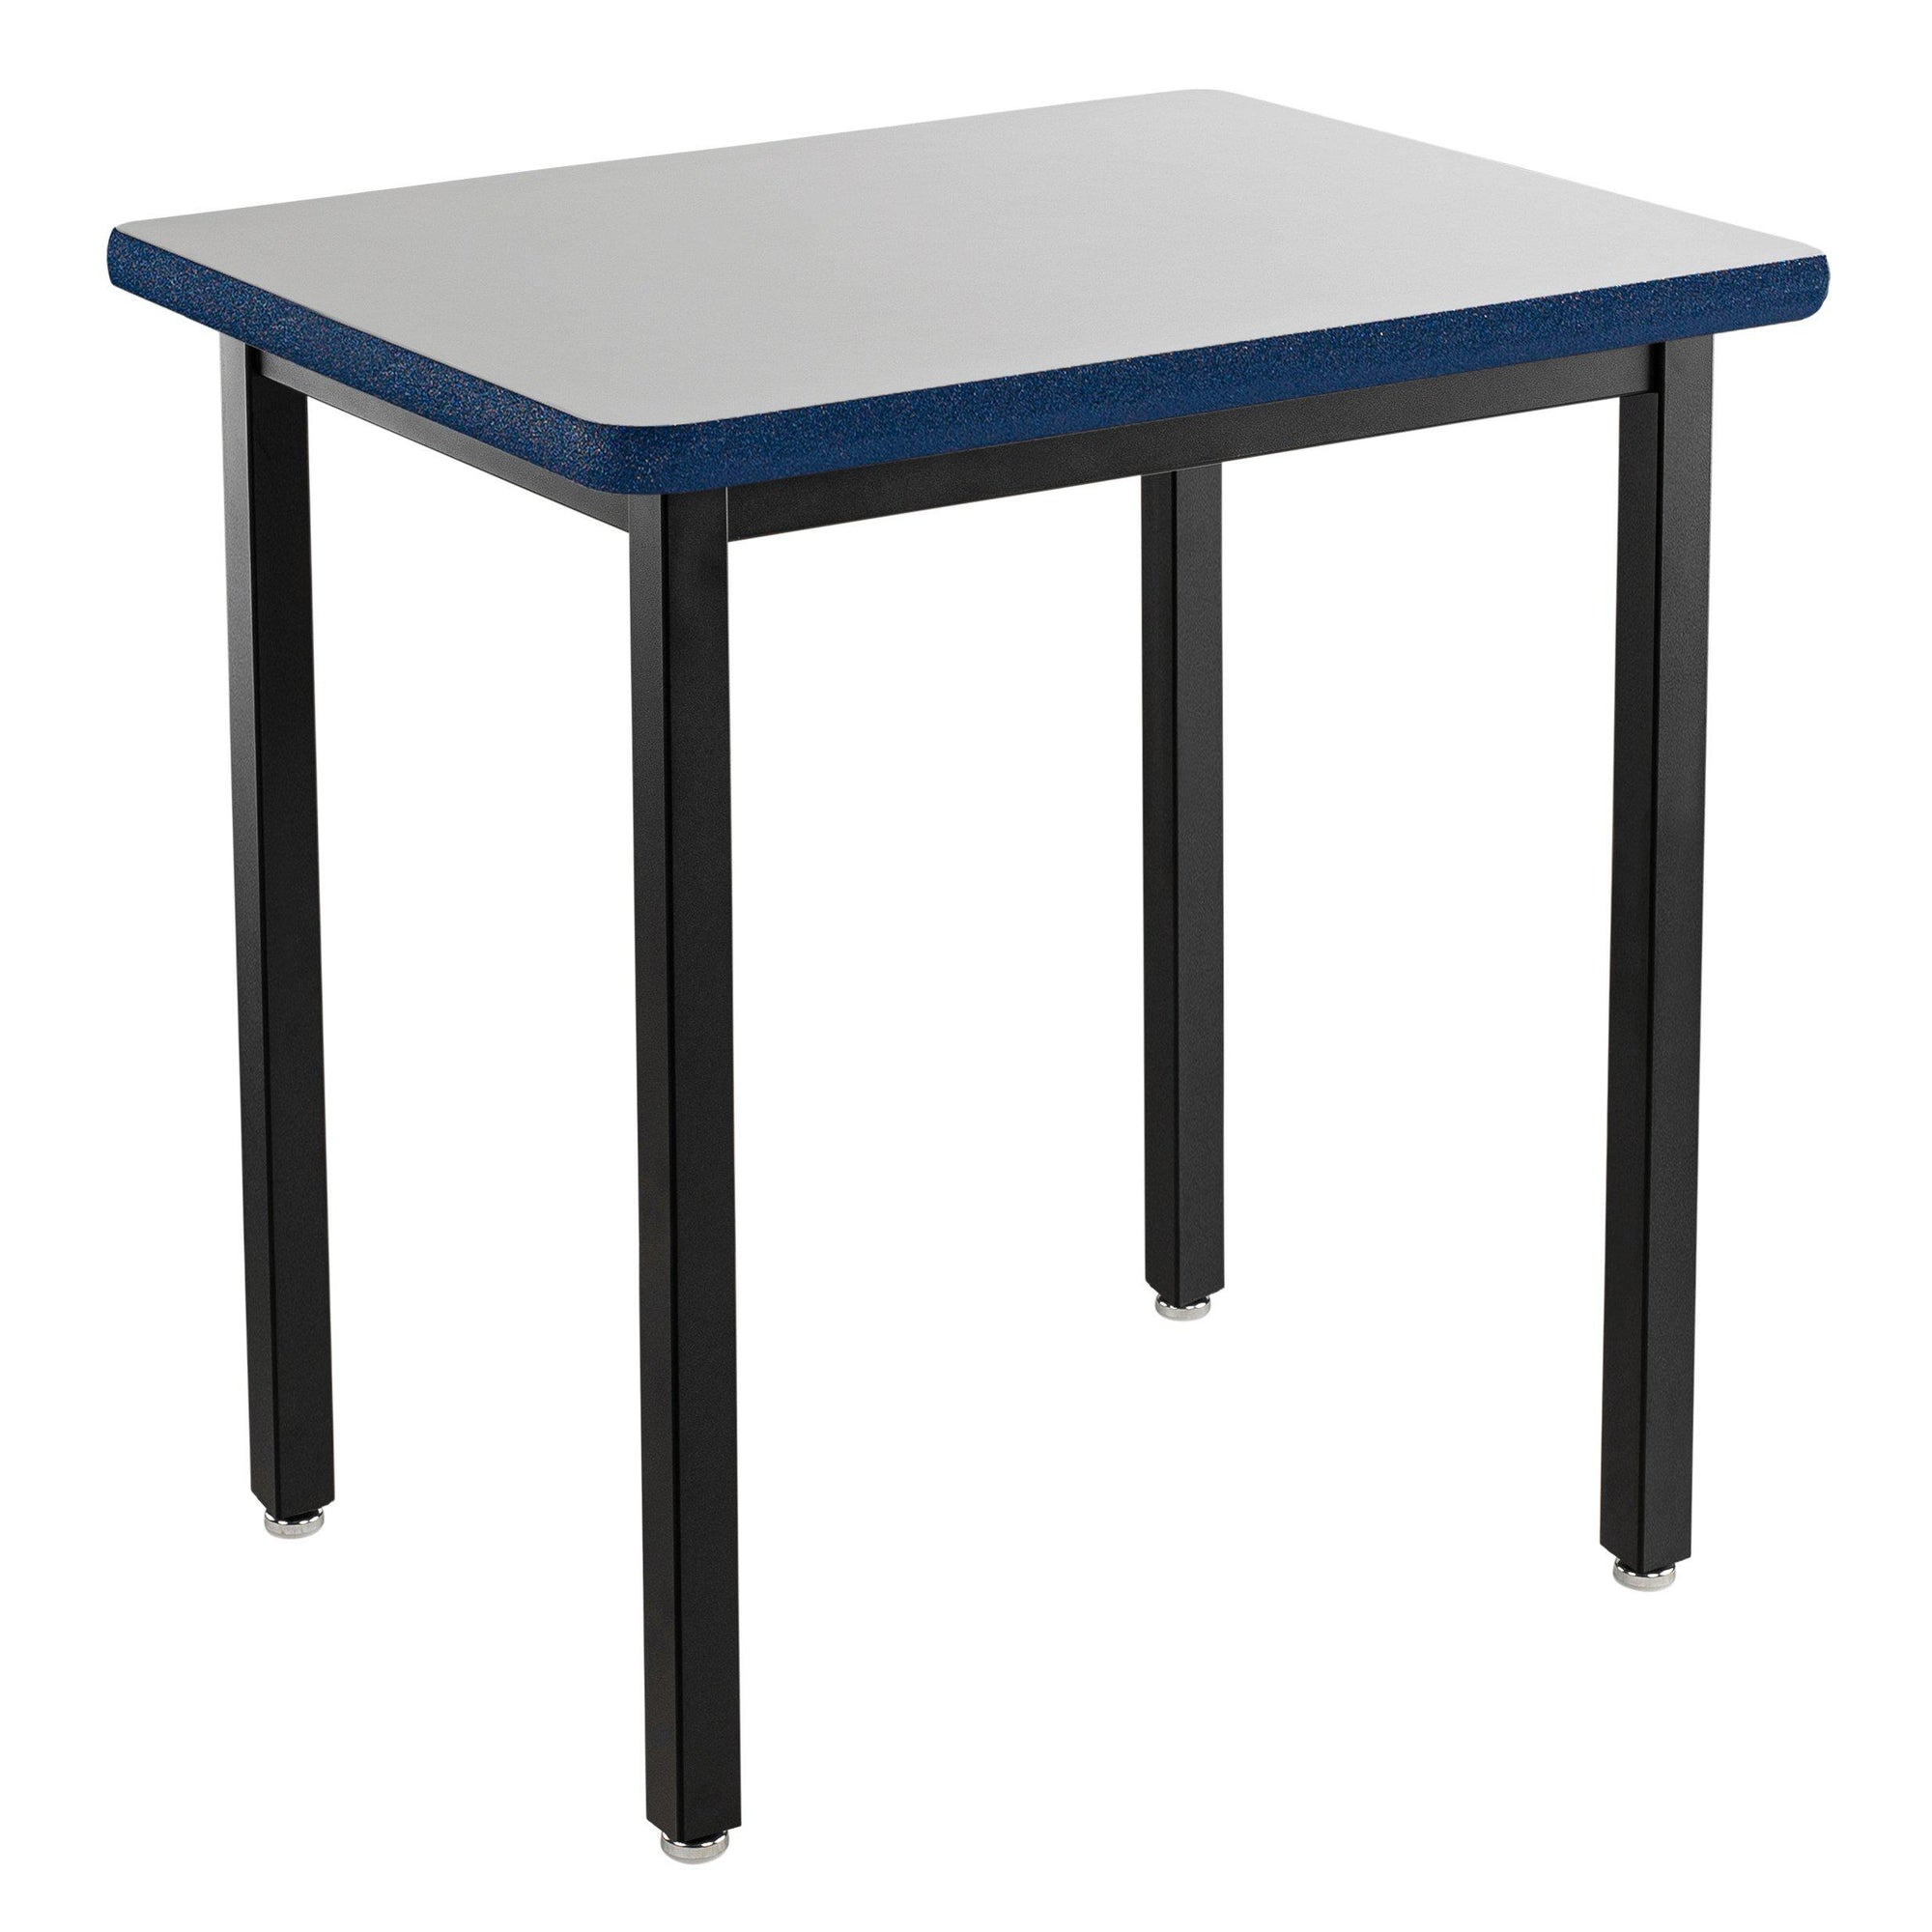 Heavy-Duty Fixed Height Utility Table, Black Frame, 36" x 36", Supreme High-Pressure Laminate Top with Black ProtectEdge